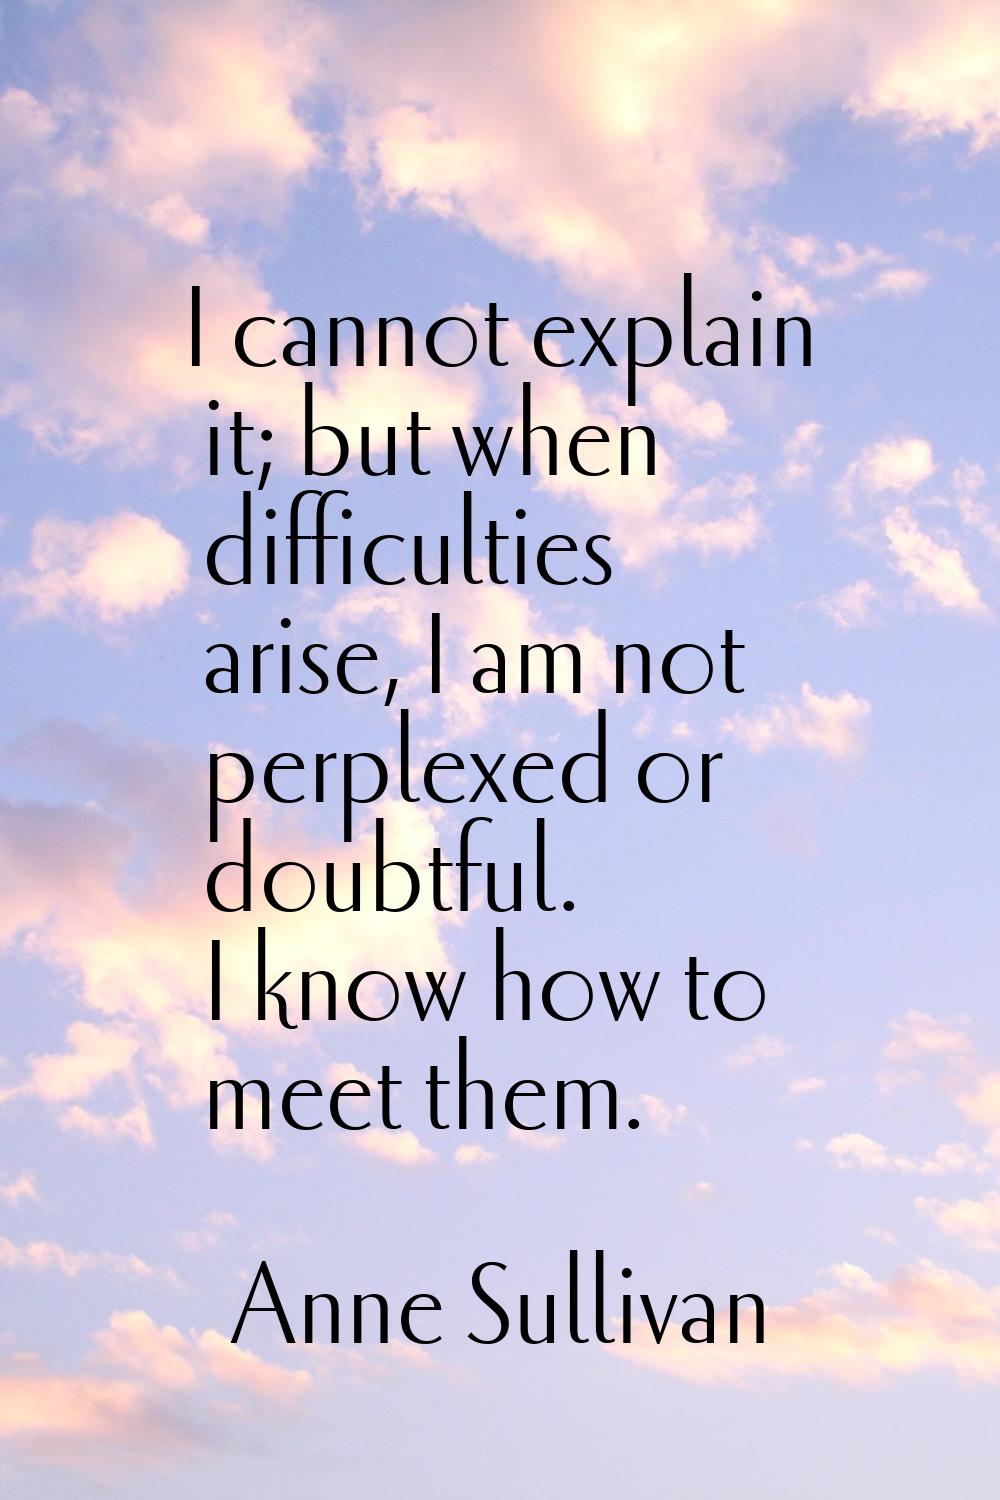 I cannot explain it; but when difficulties arise, I am not perplexed or doubtful. I know how to mee